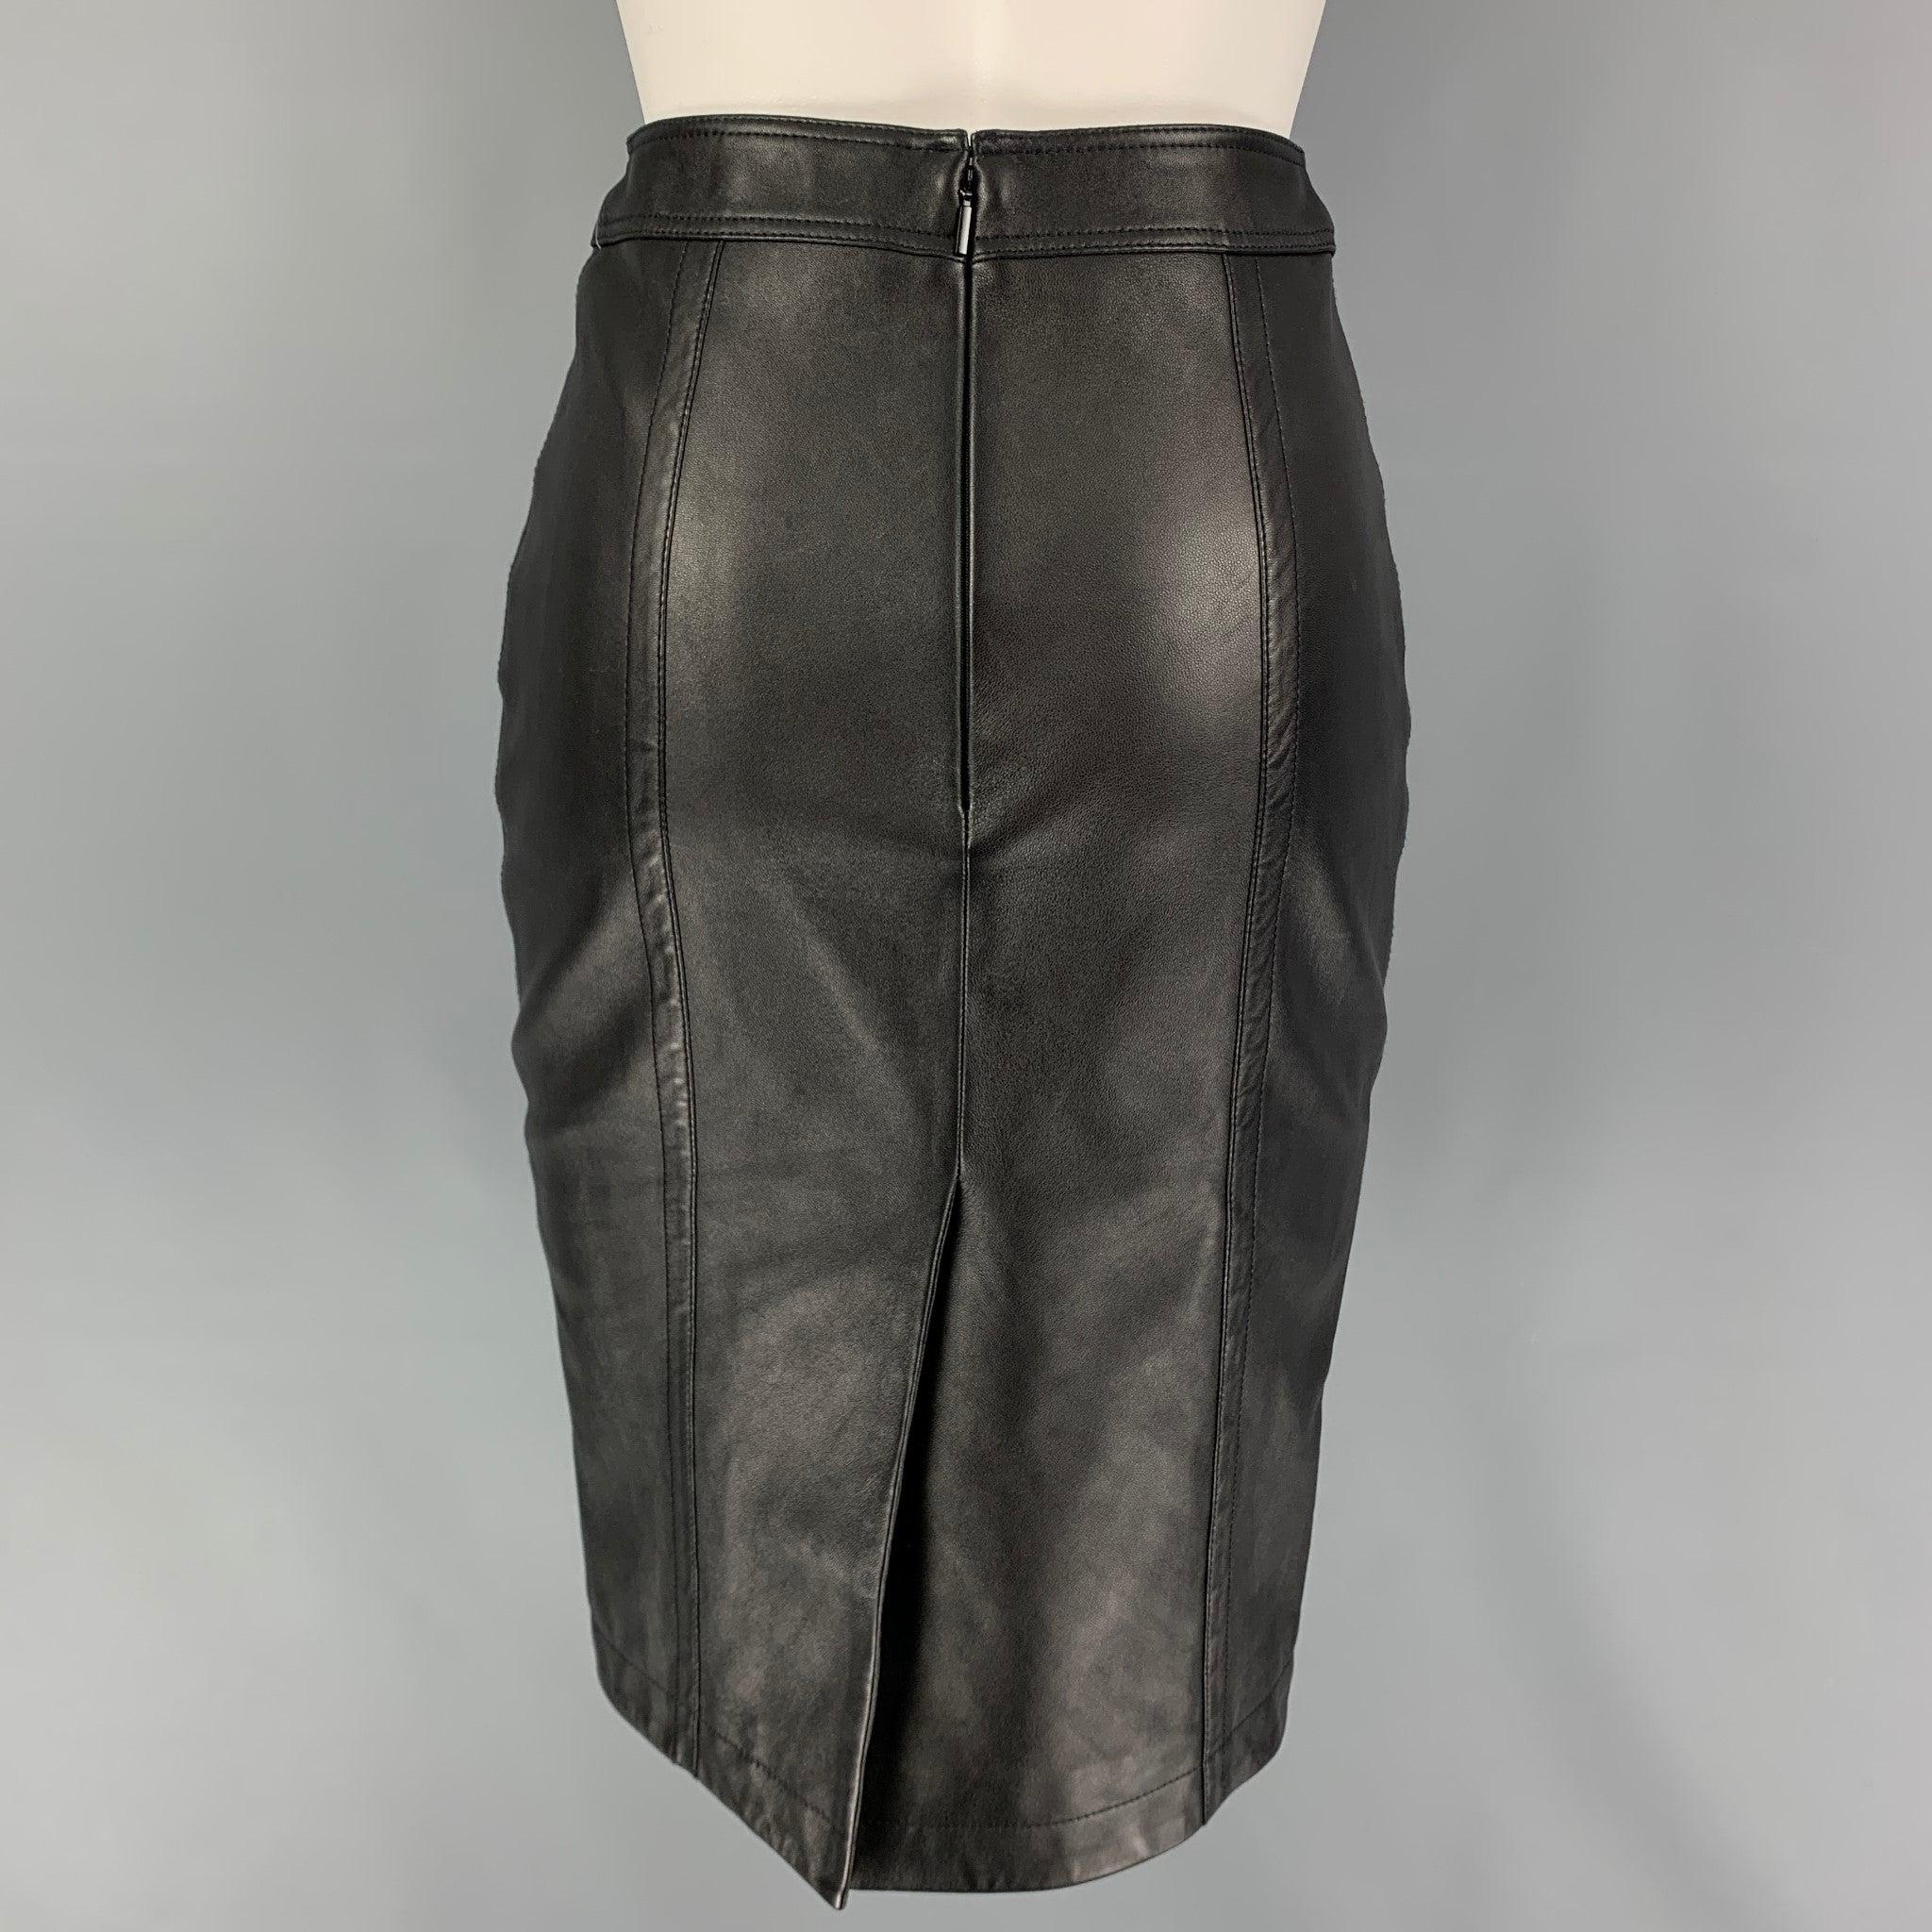 SAINT LAURENT Size 2 Black Lamb Skin Pencil Skirt In Good Condition For Sale In San Francisco, CA